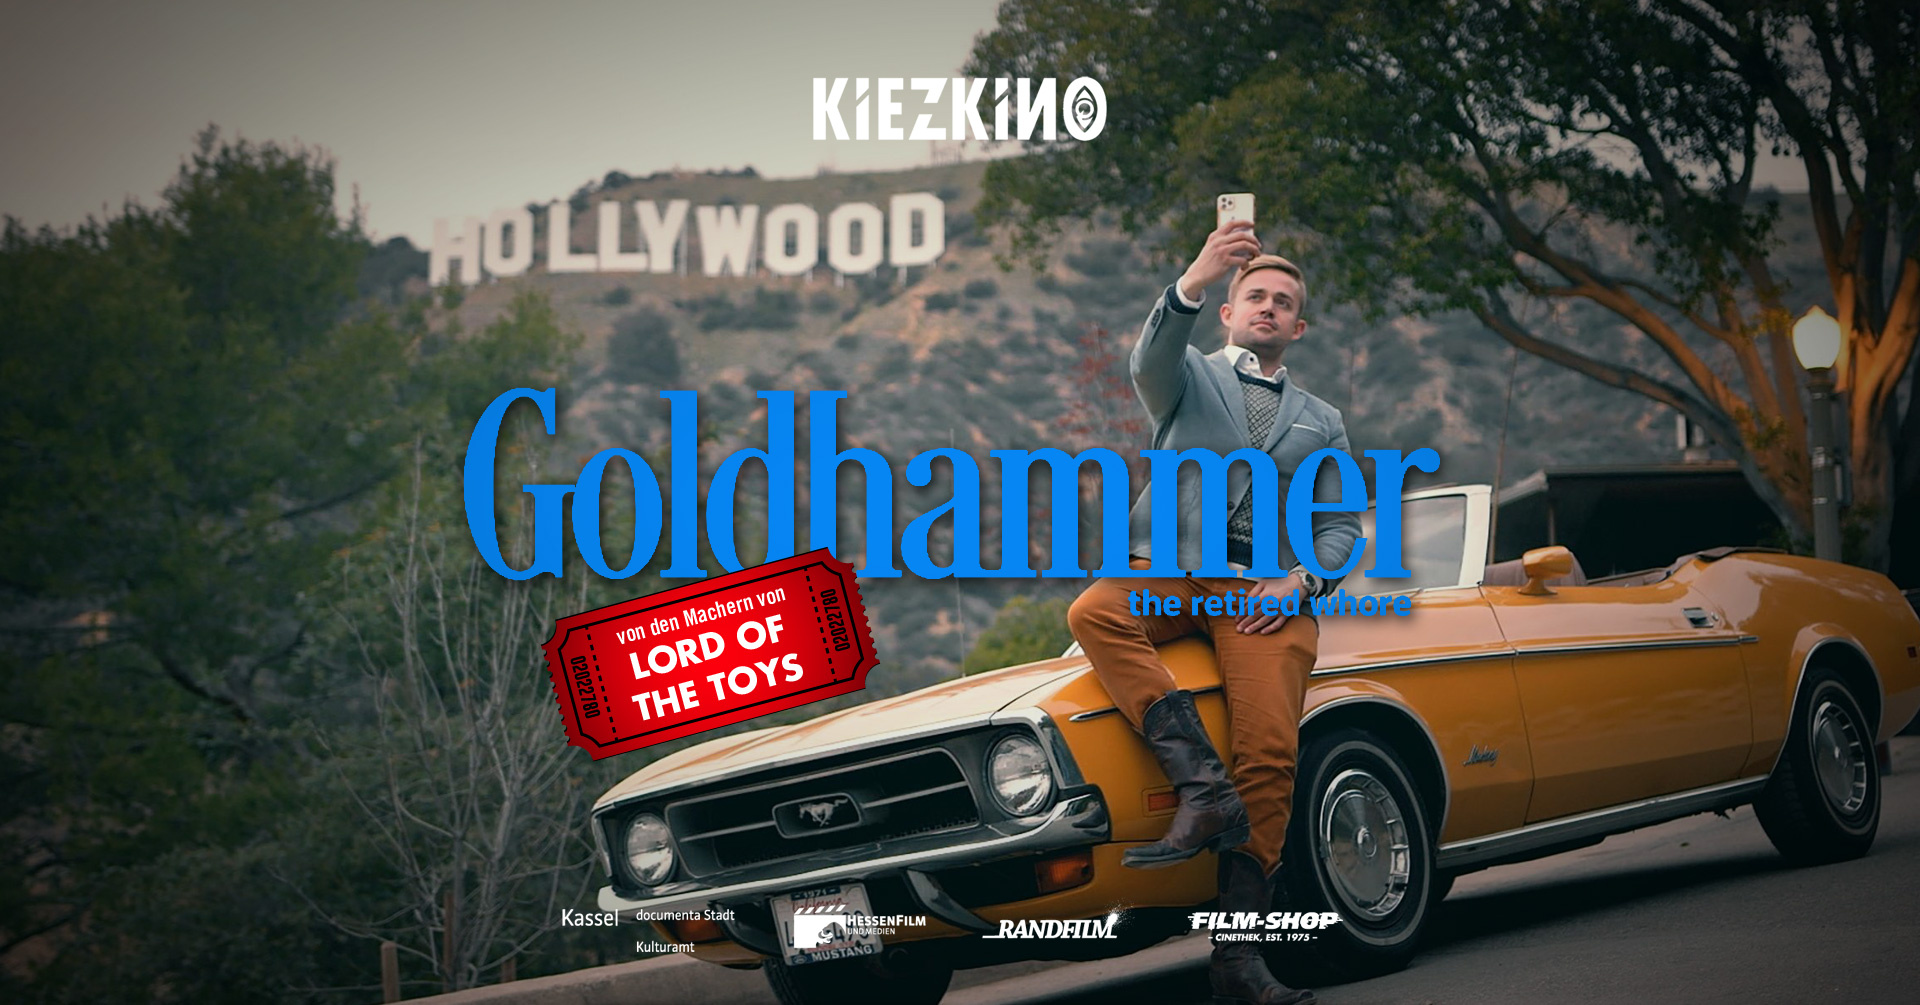 Goldhammer - The Retired Whore